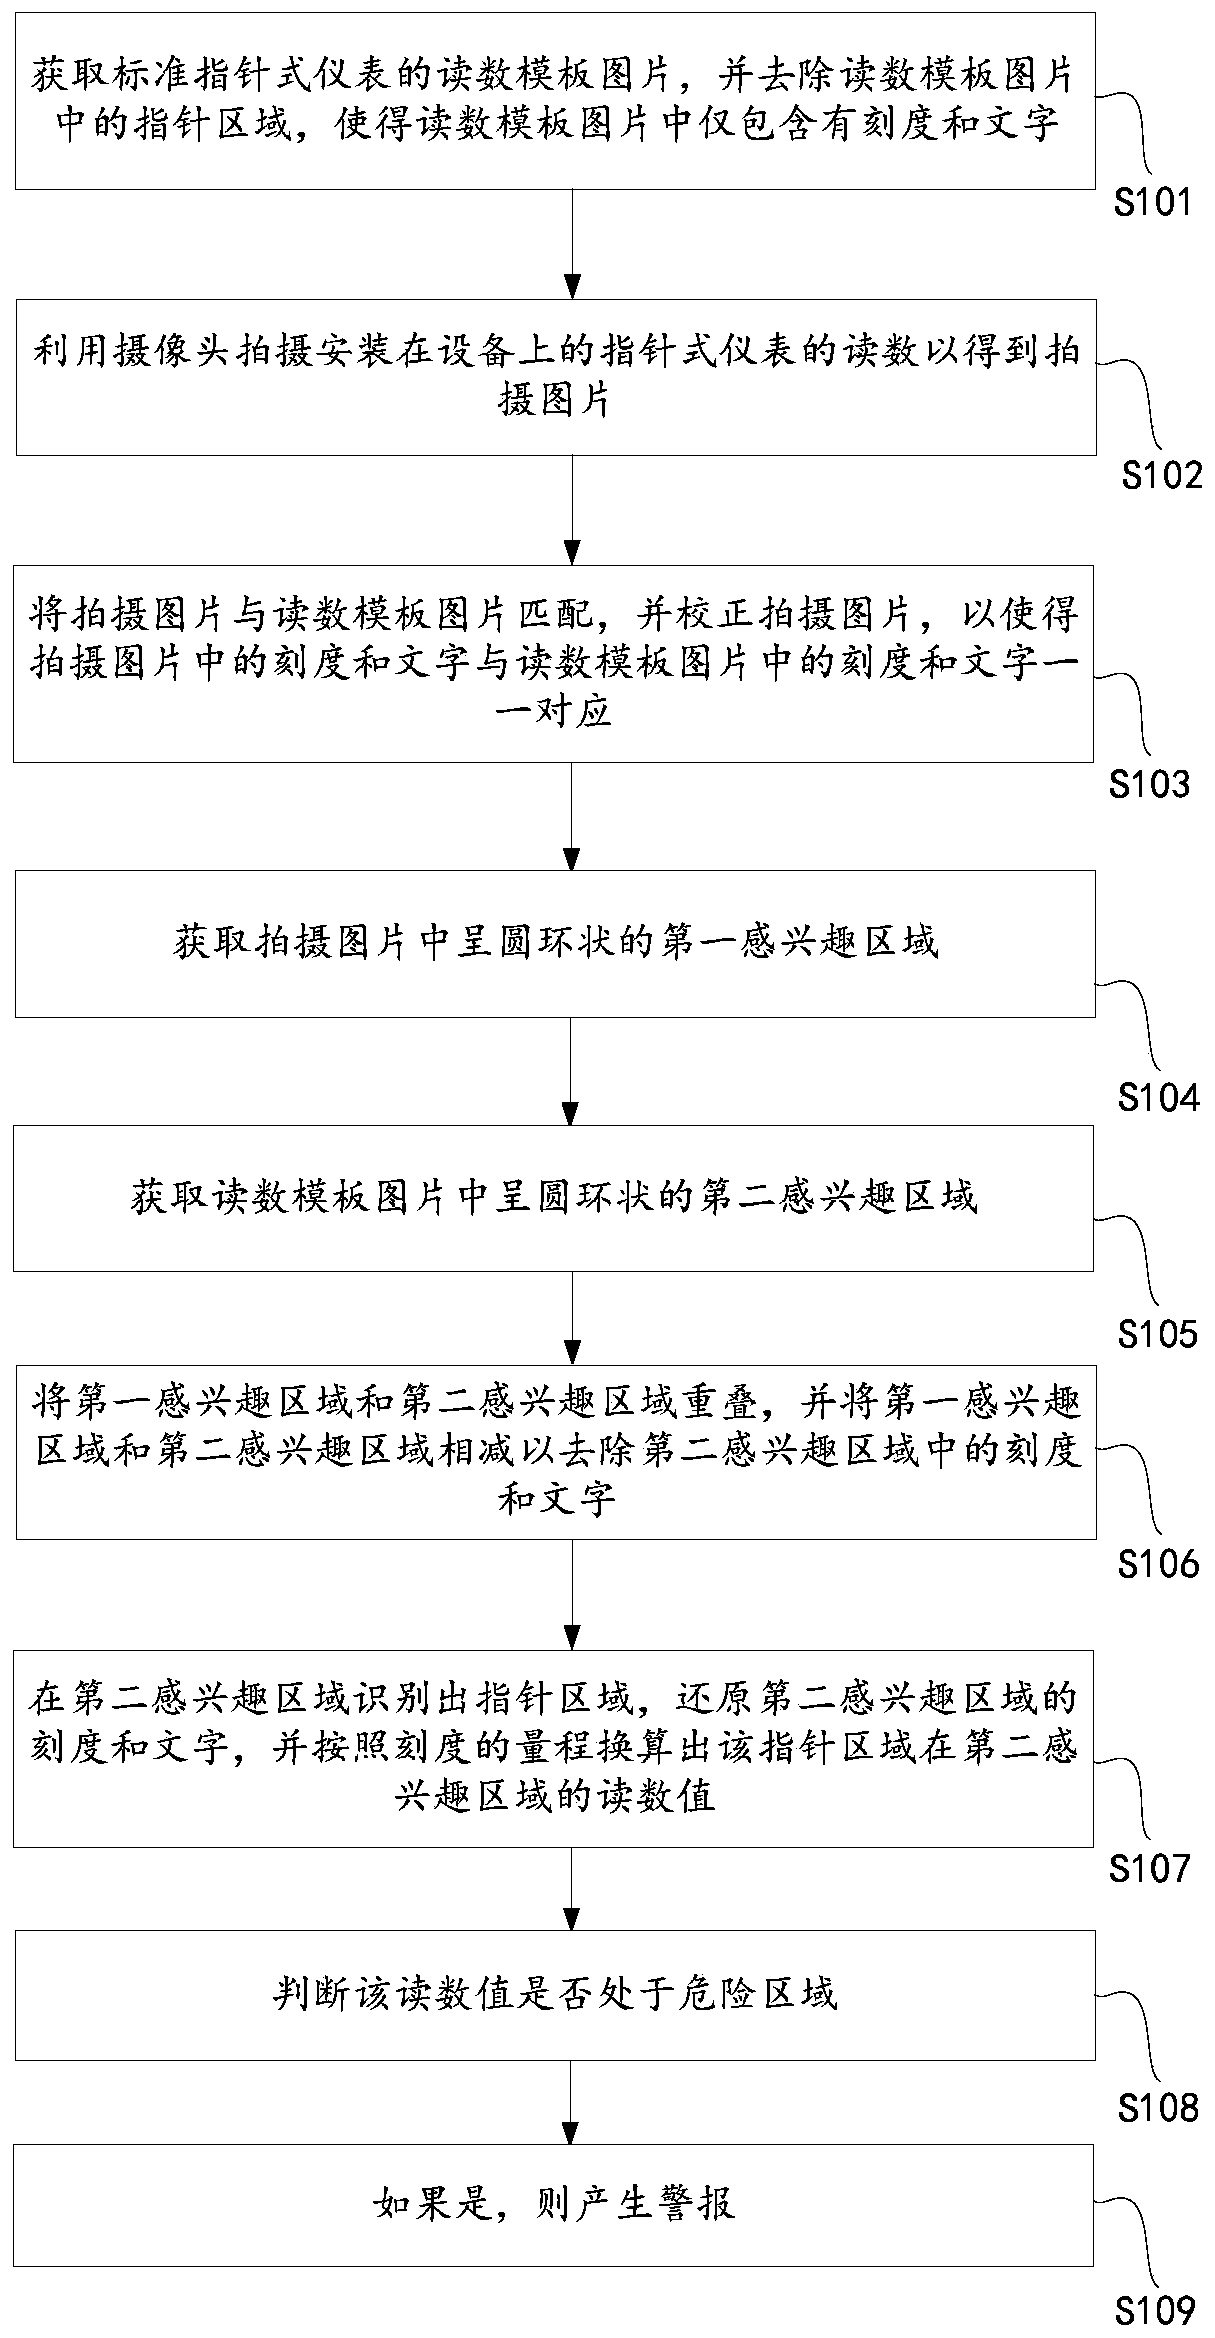 Pointer type instrument image identification reading and safety early warning method